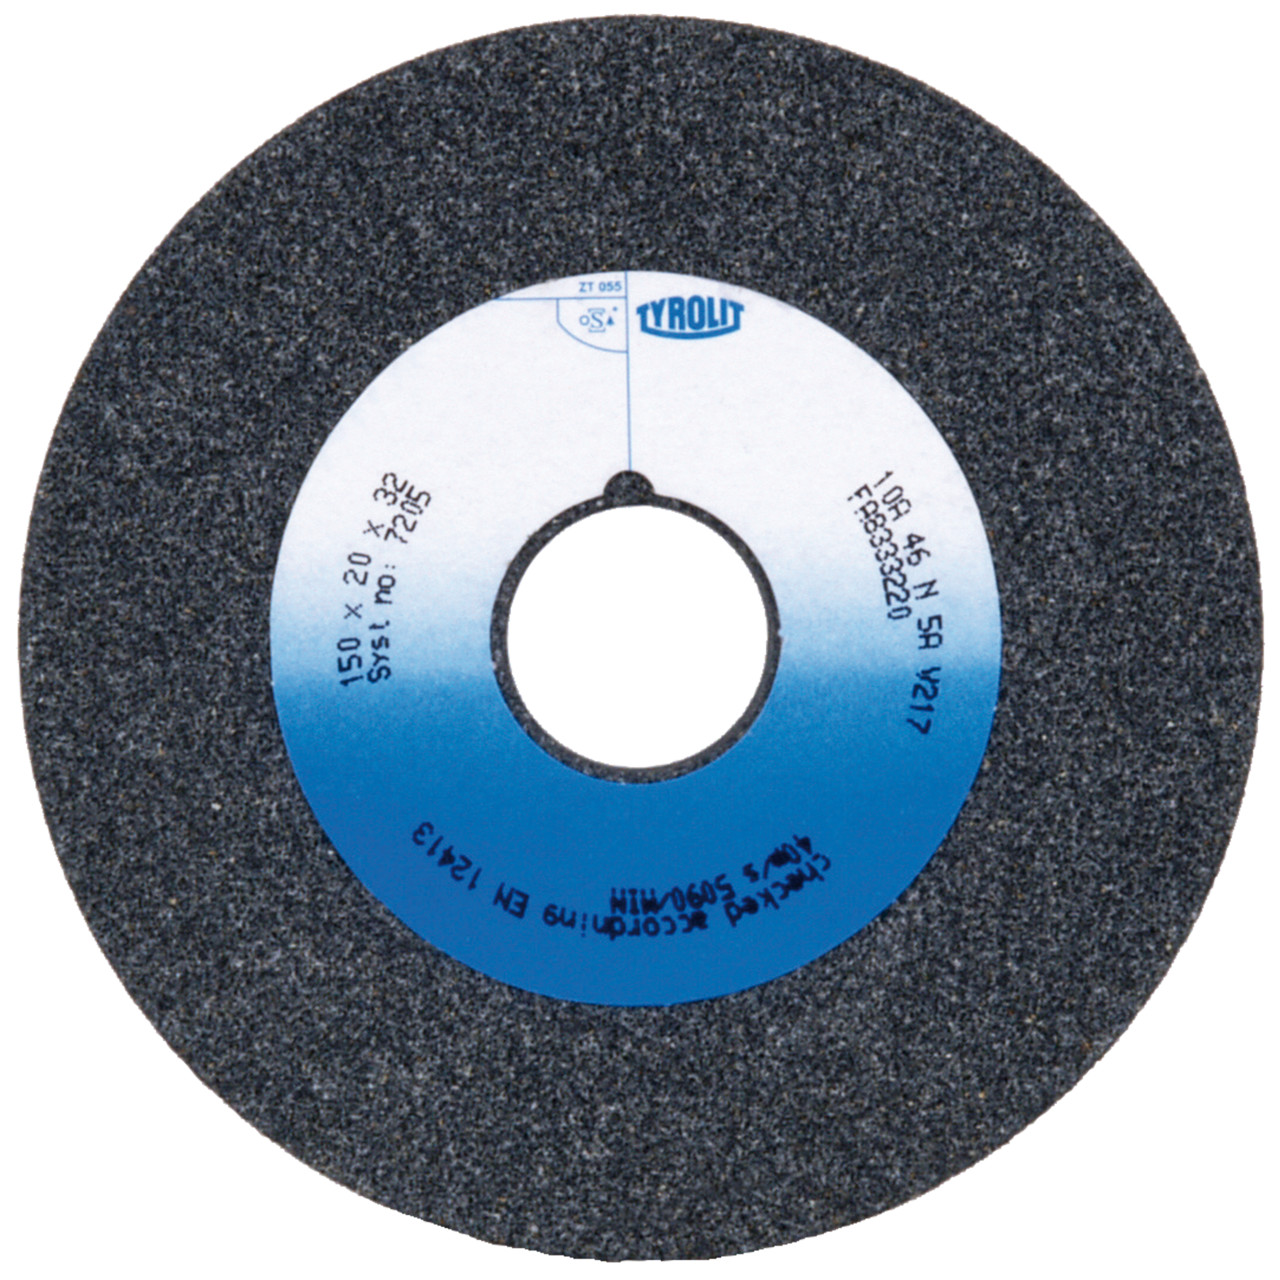 Tyrolit Conventional ceramic grinding discs DxDxH 200x25x51 For unalloyed and low-alloy steels, shape: 1, Art. 718361